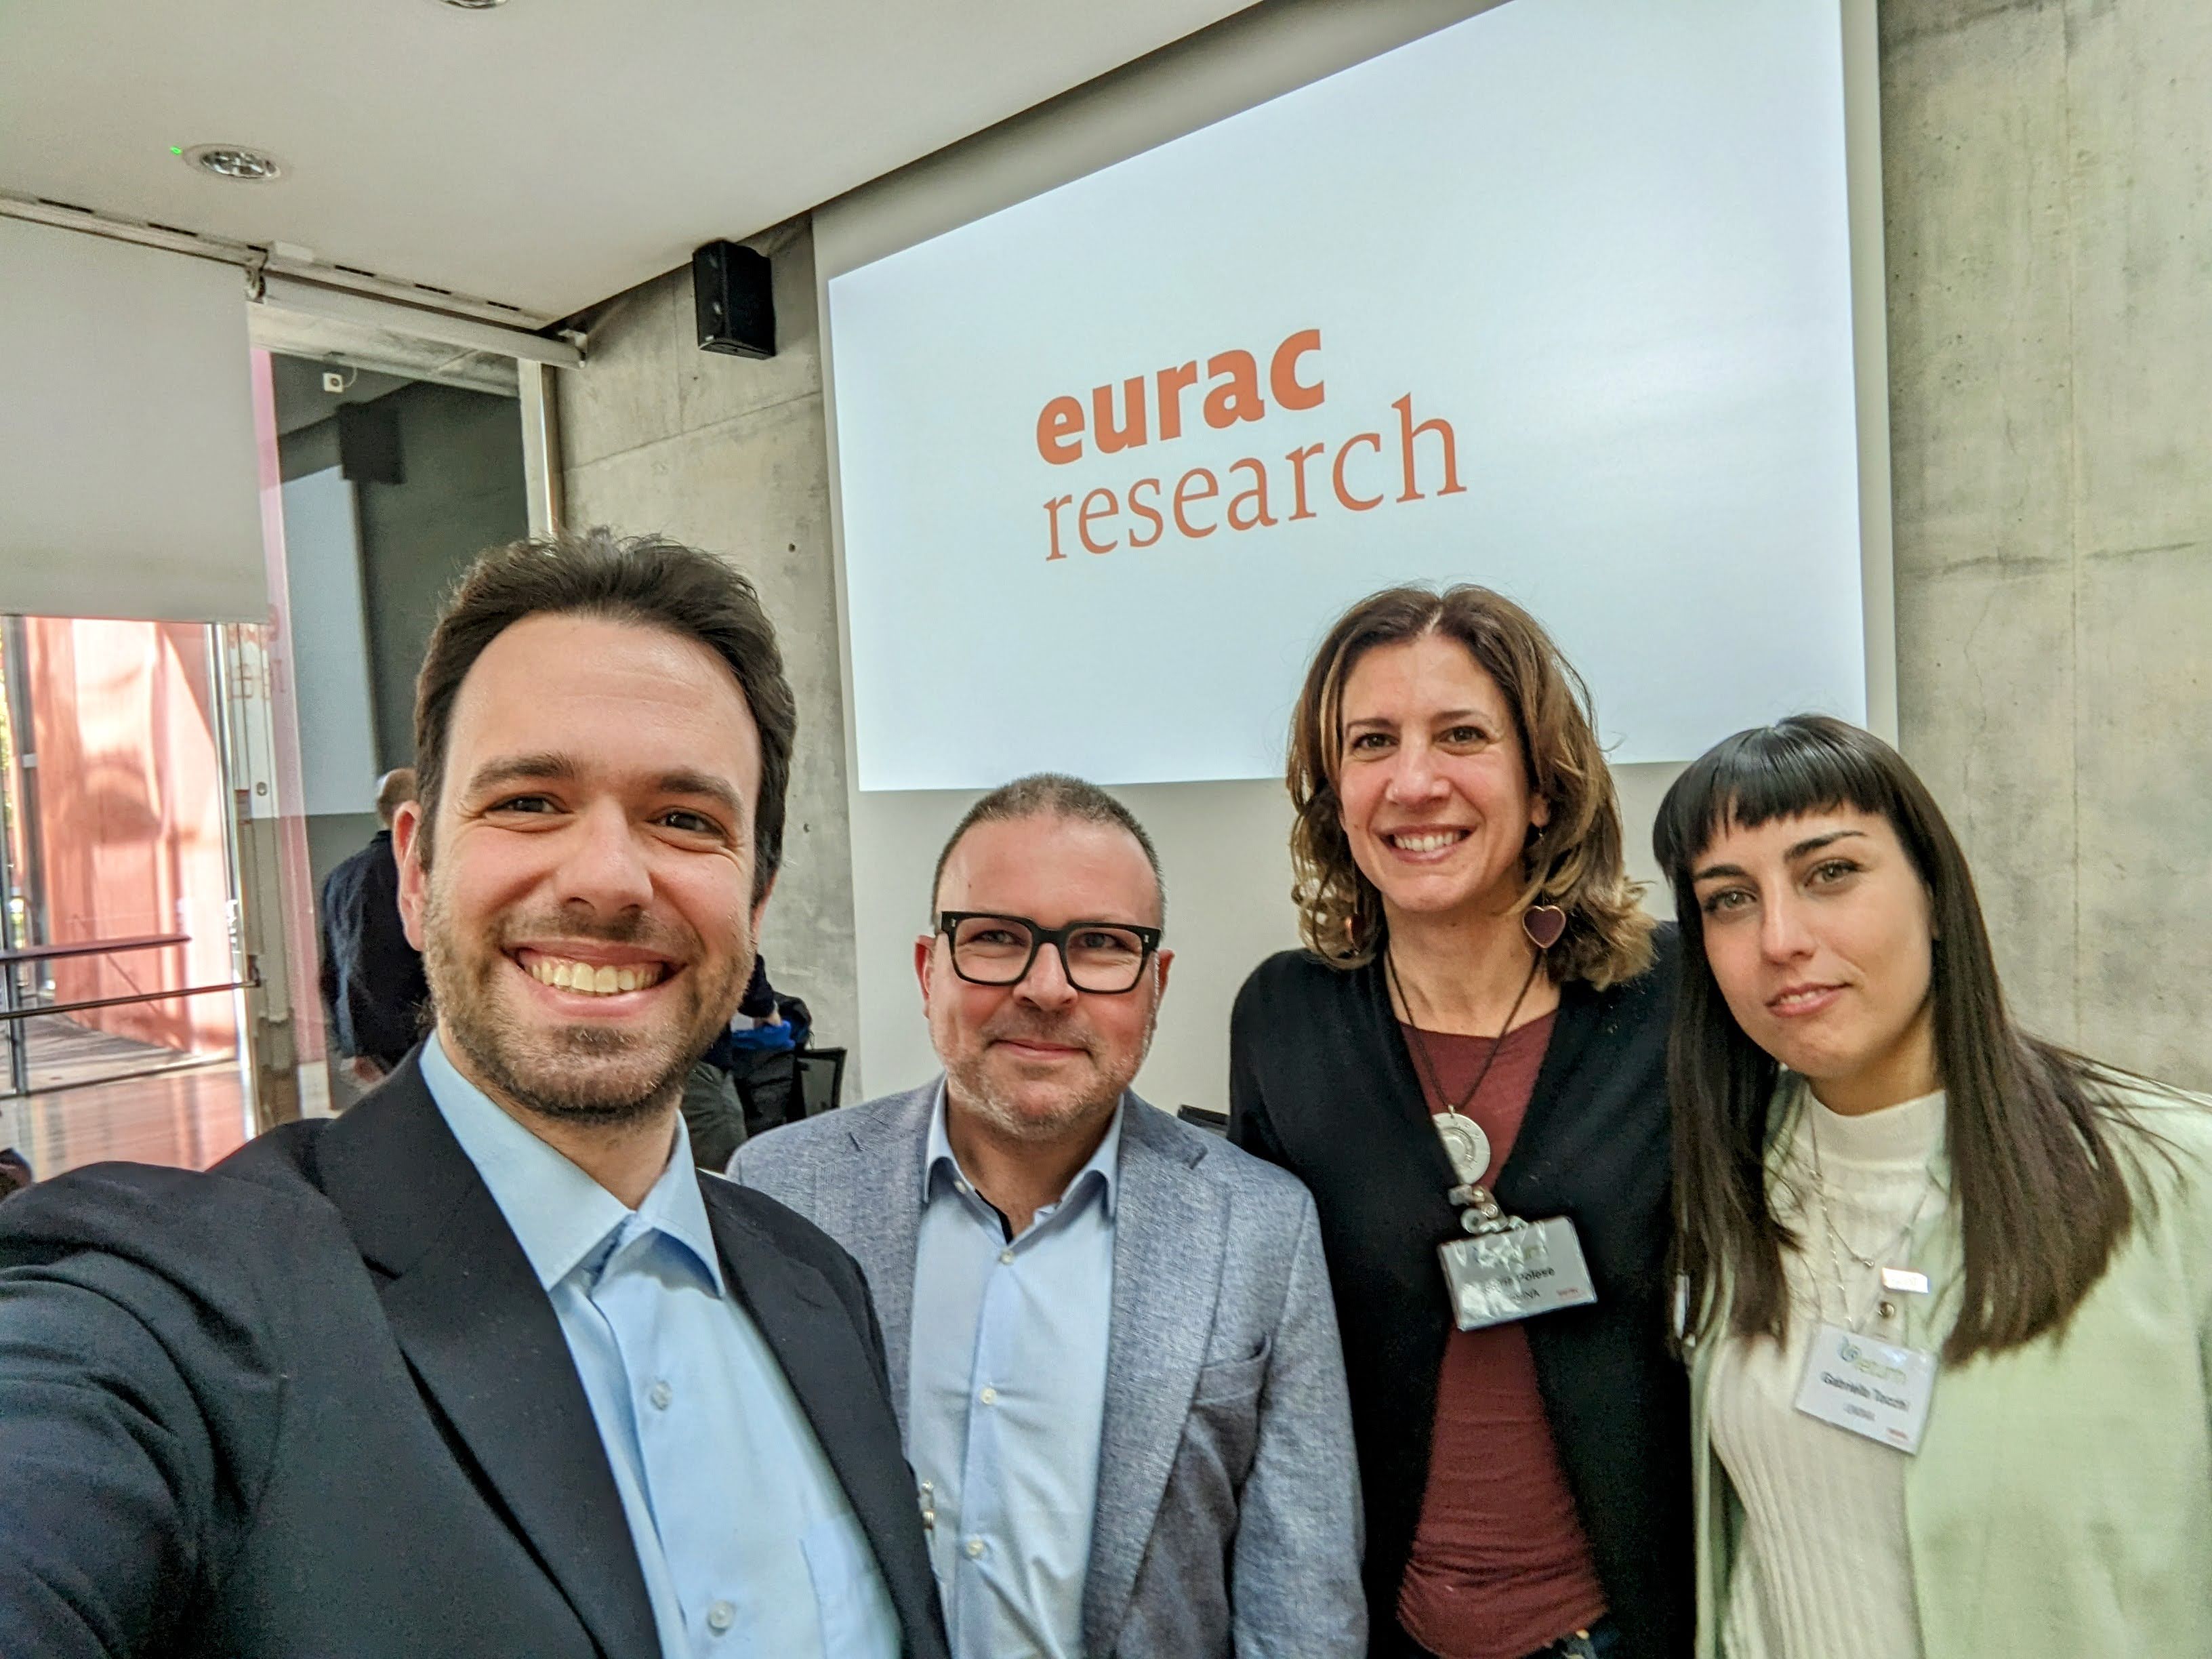 Presenting at Eurac Research in Bolzano, Italy